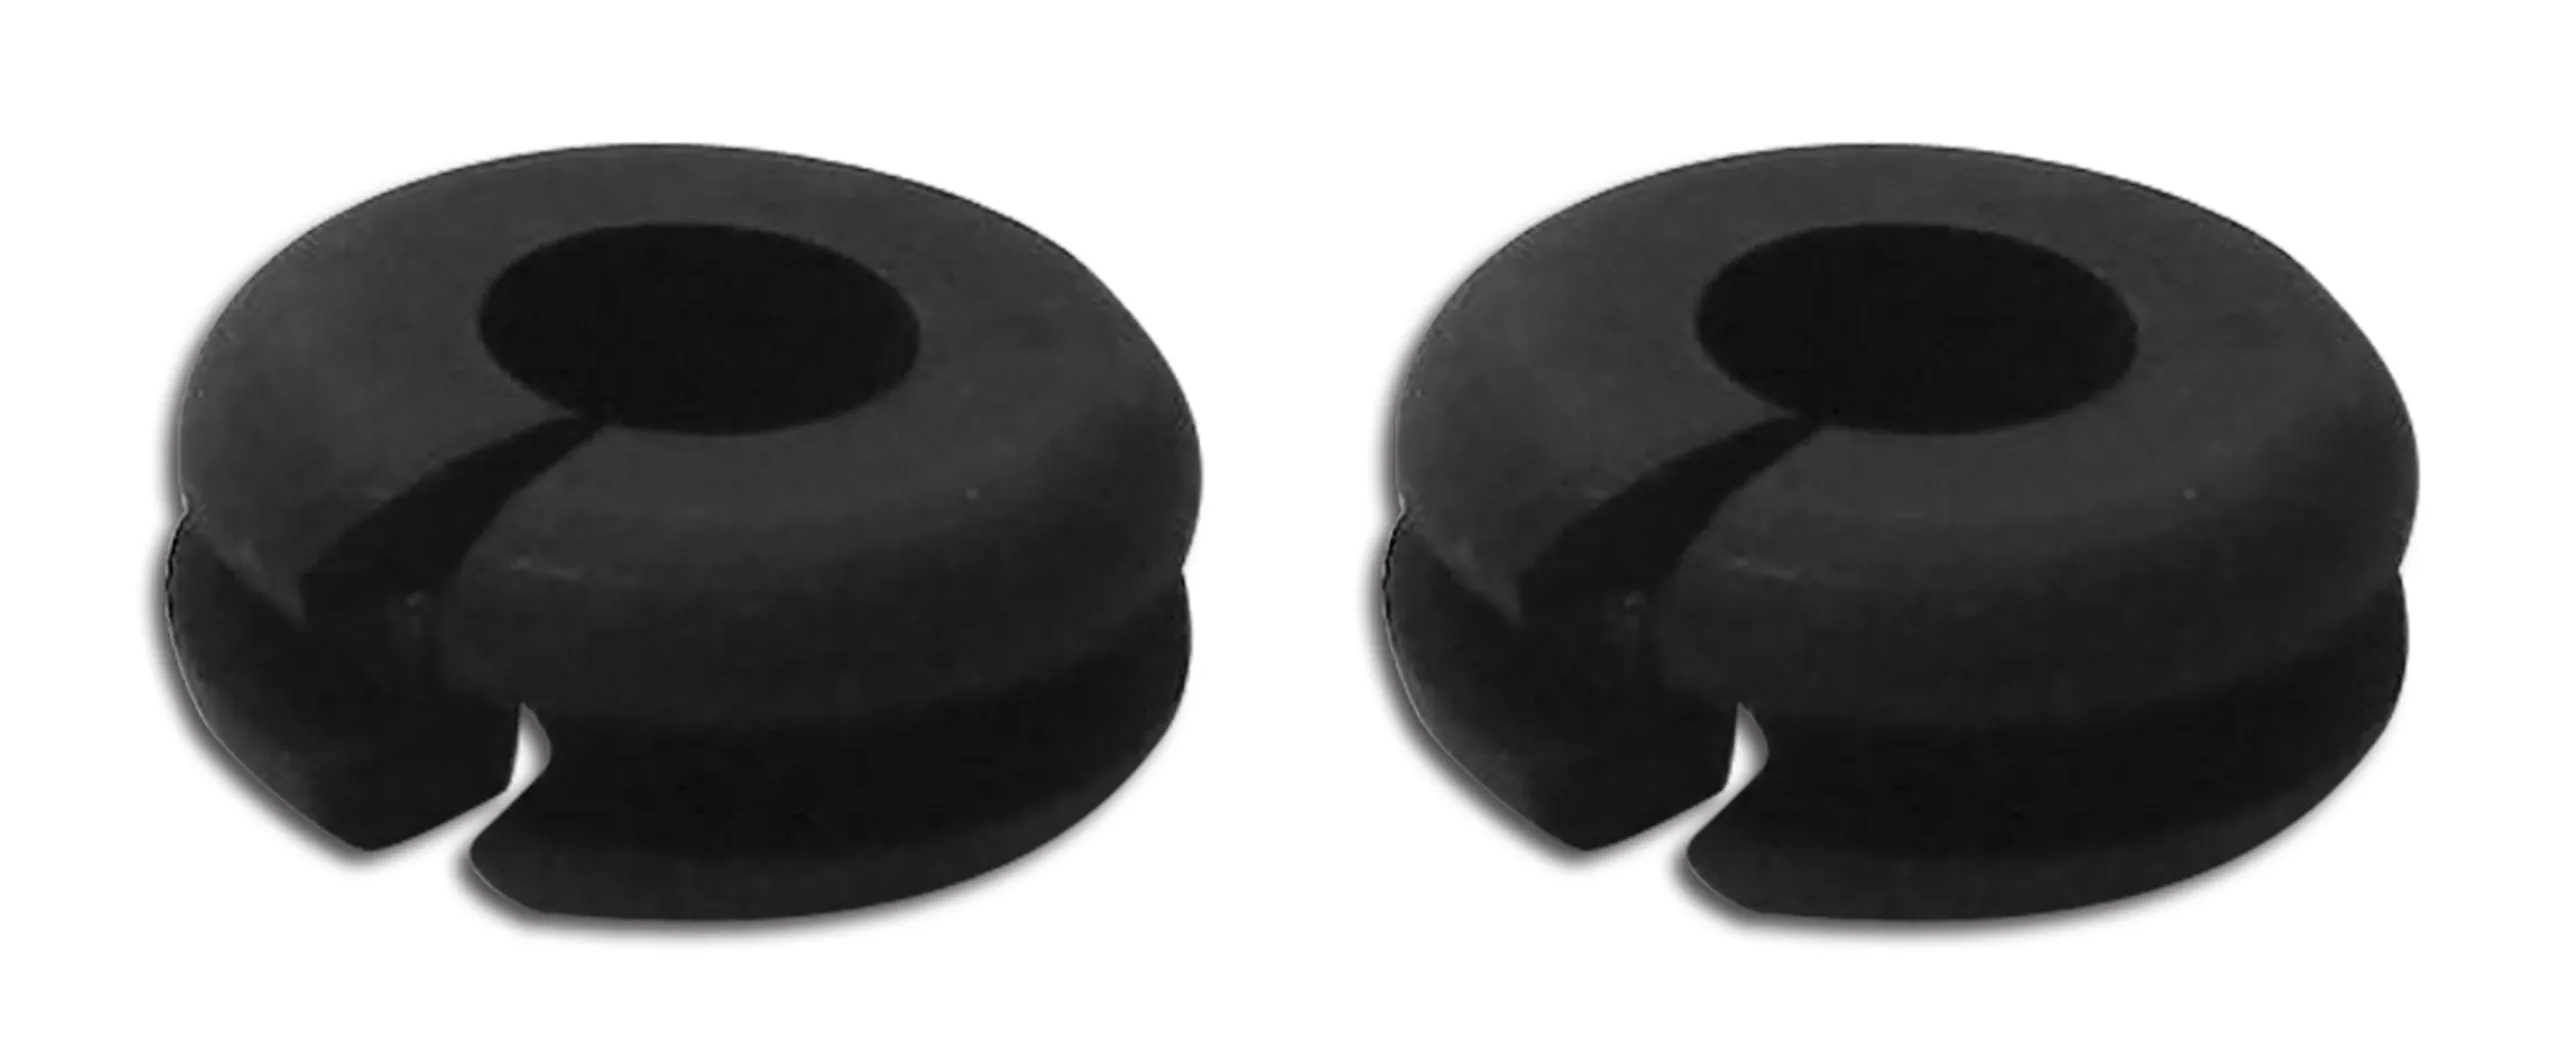 1963-1976 Chevrolet Corvette Washer Hose Firewall Grommets. - Auto Accessories of America